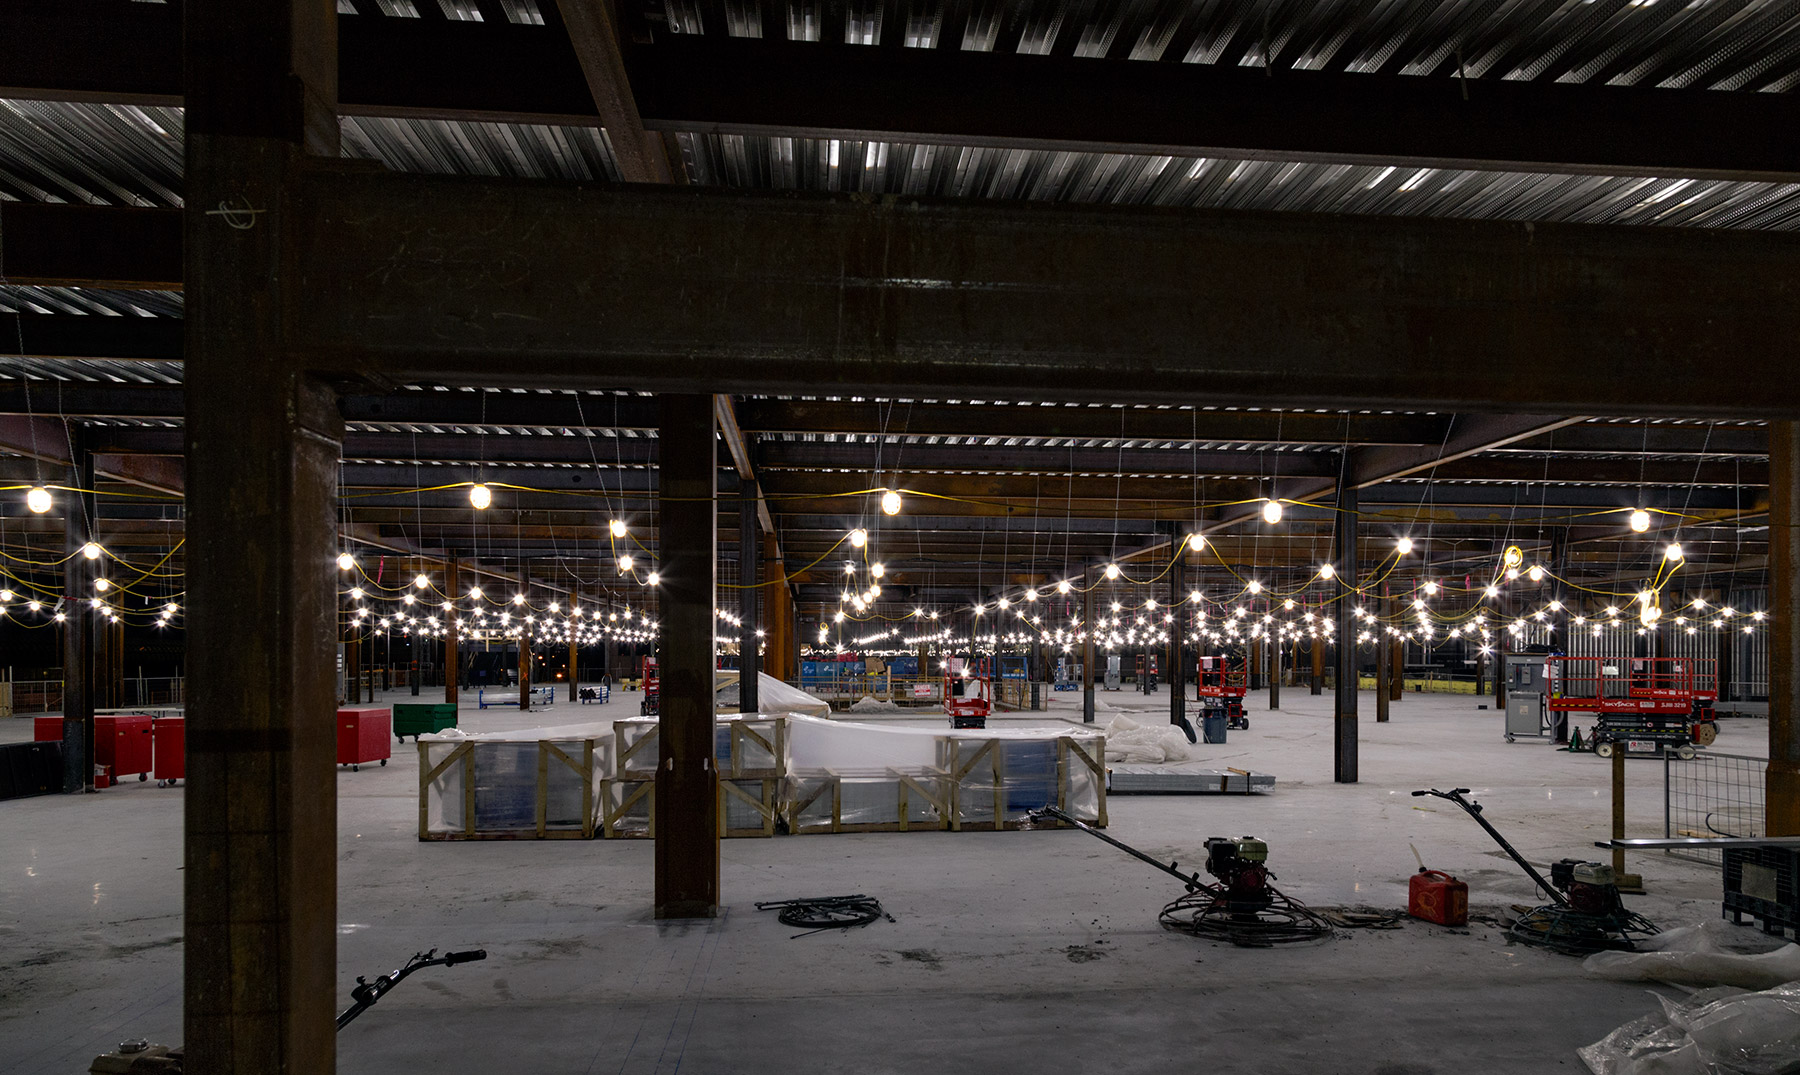 20151008. Hanging lights make Yorkdale Mall's future Nordstrom a